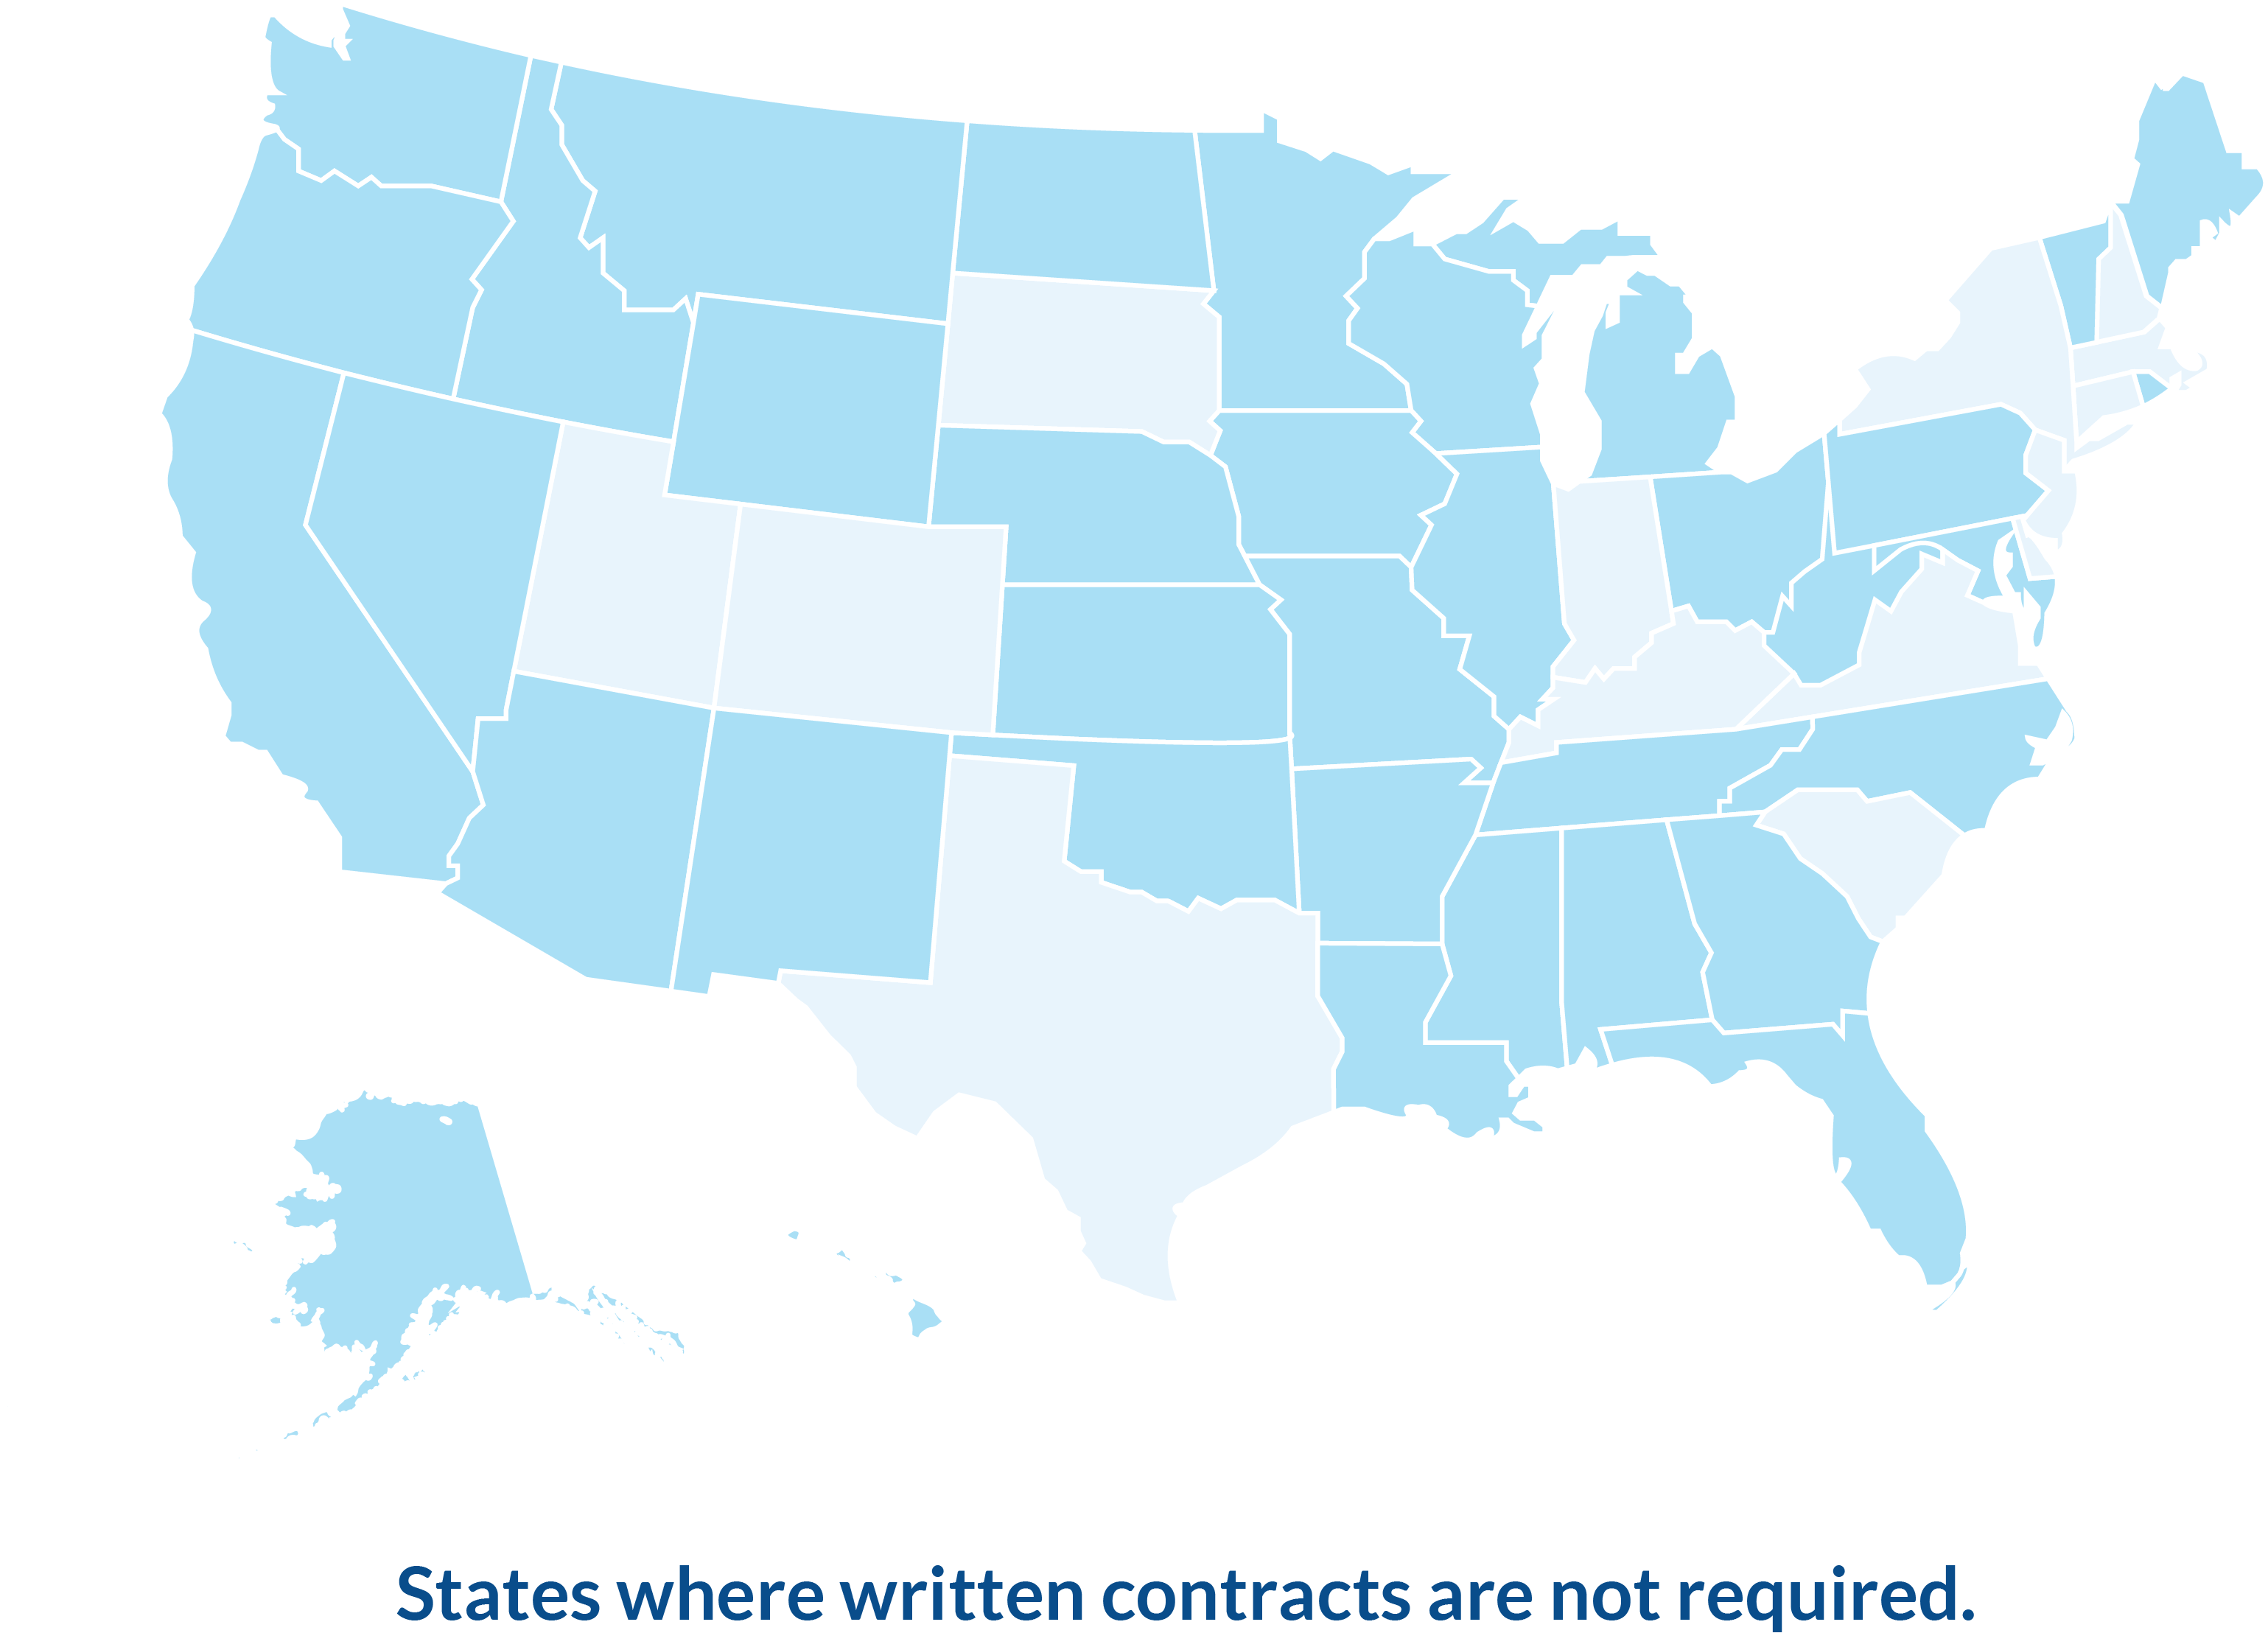 States where written contracts are not required